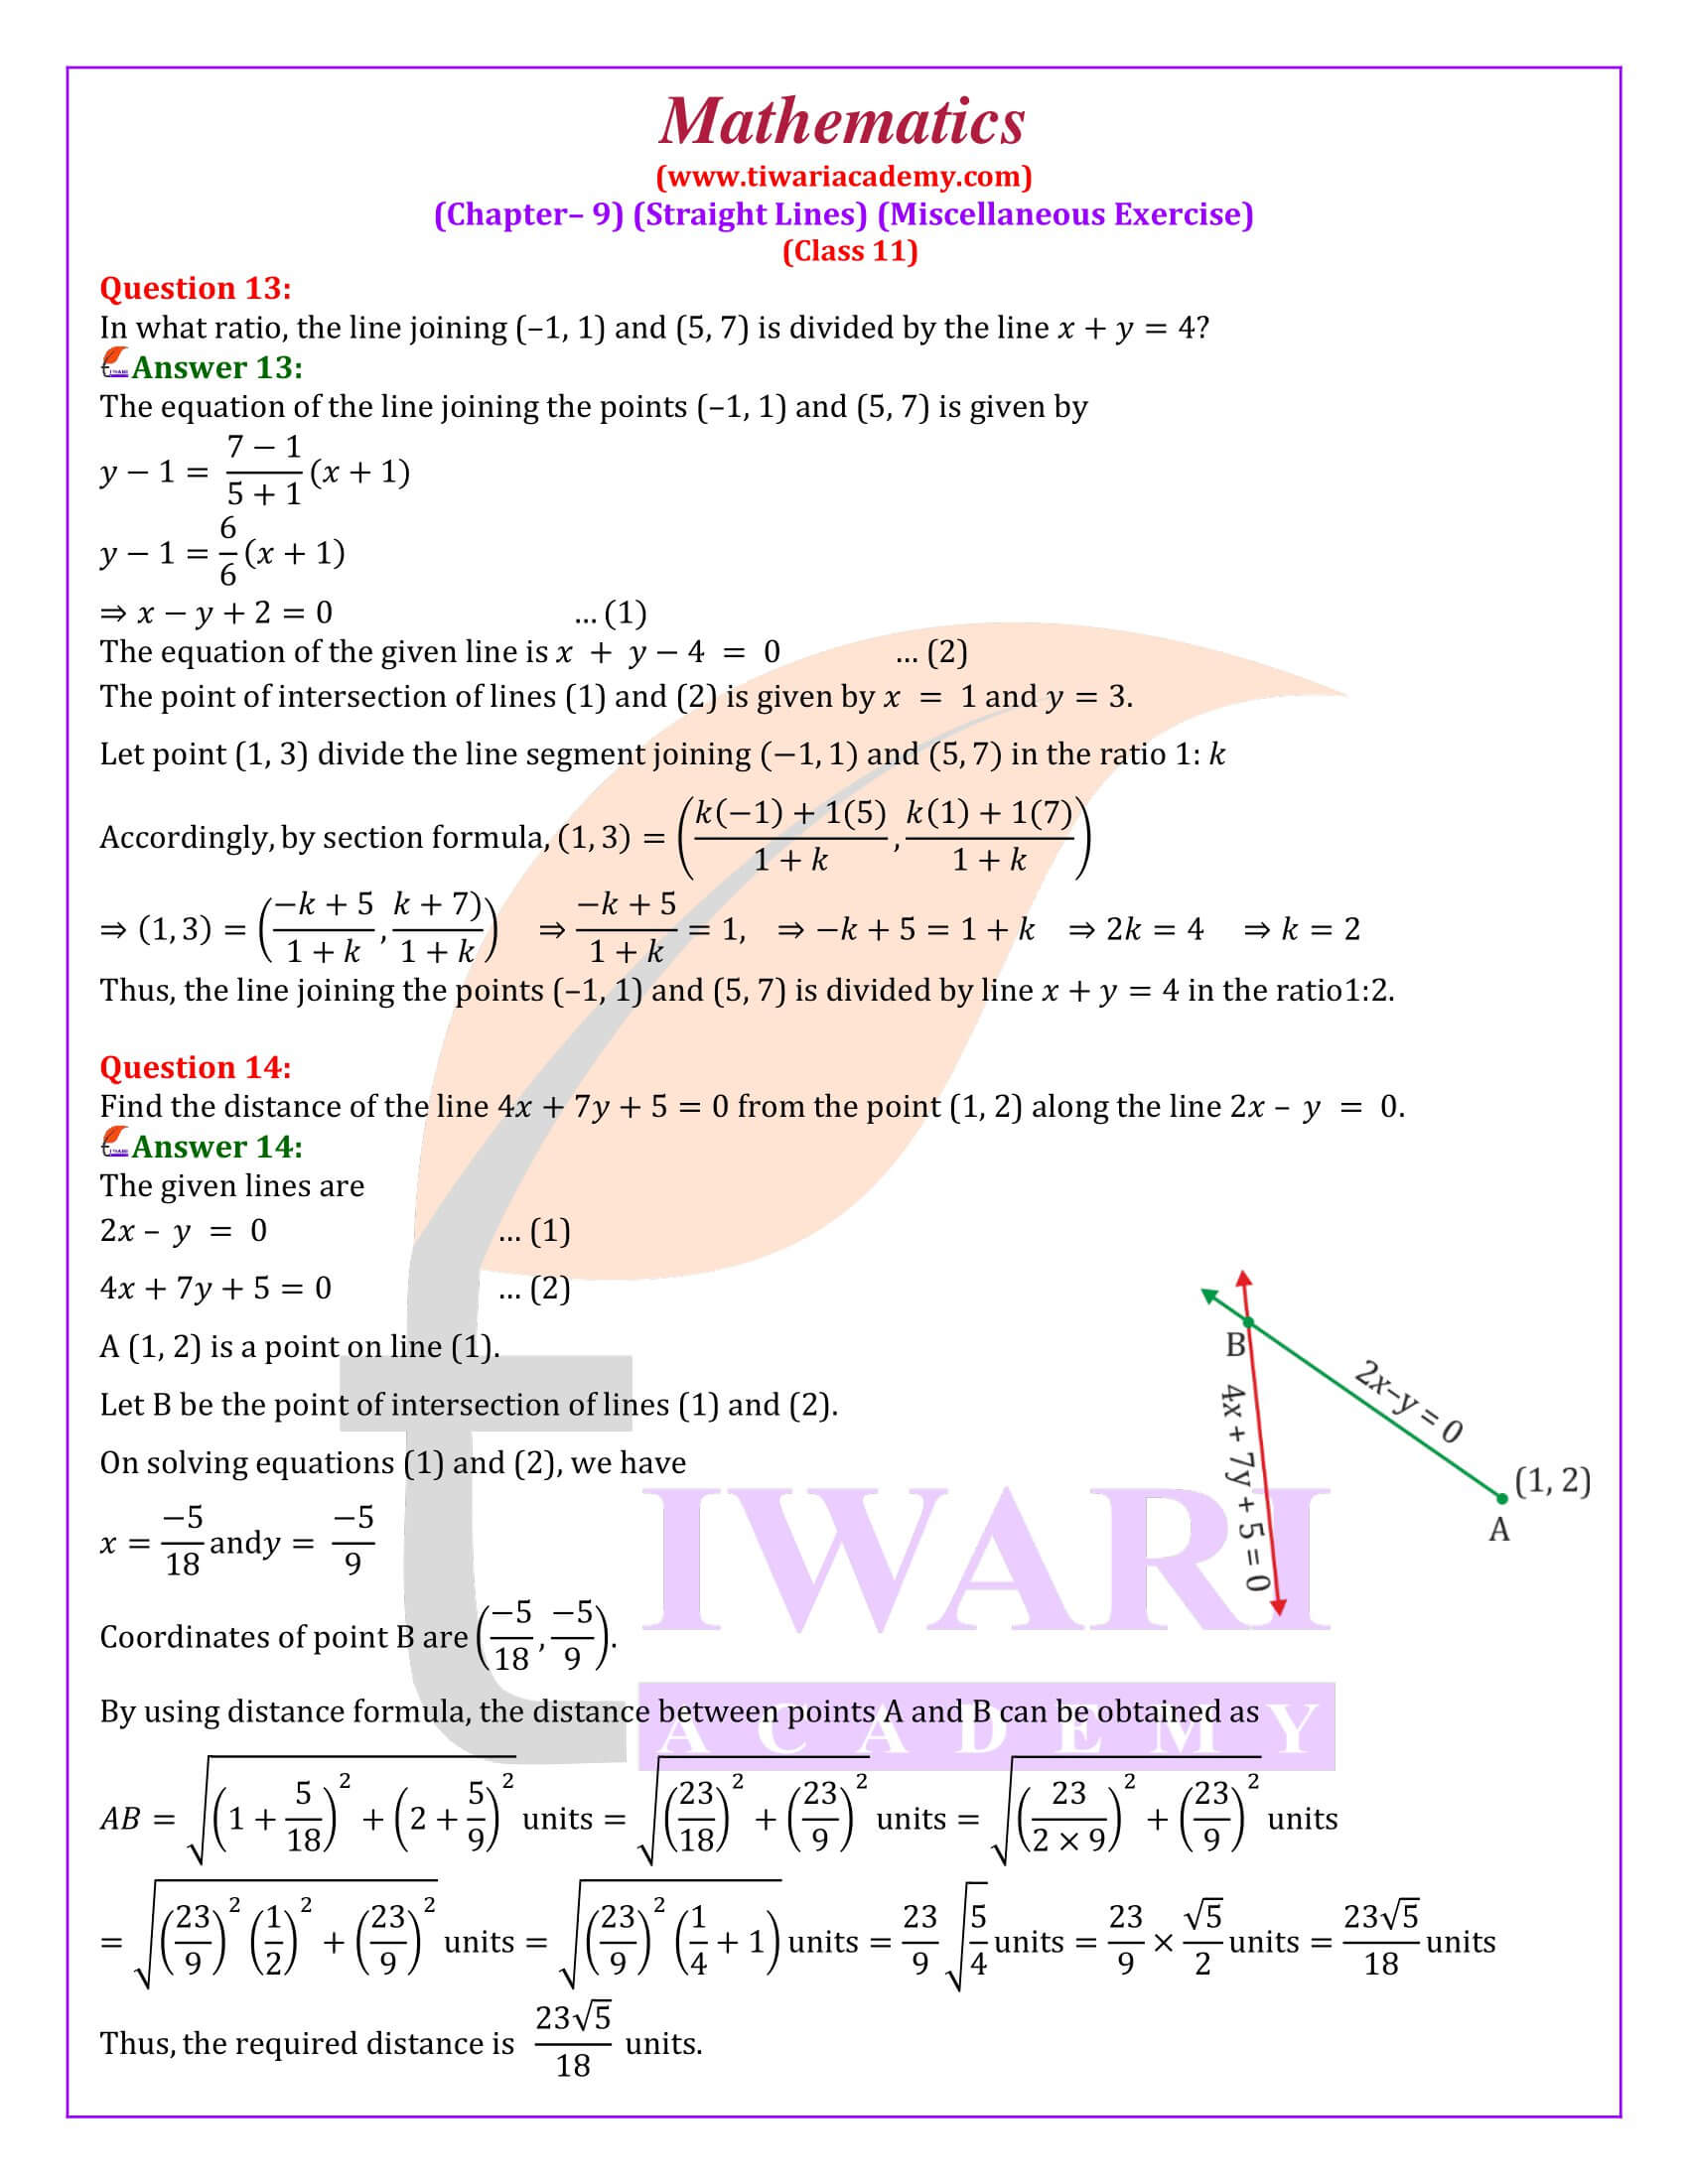 Class 11 Maths Chapter 9 Miscellaneous Exercise